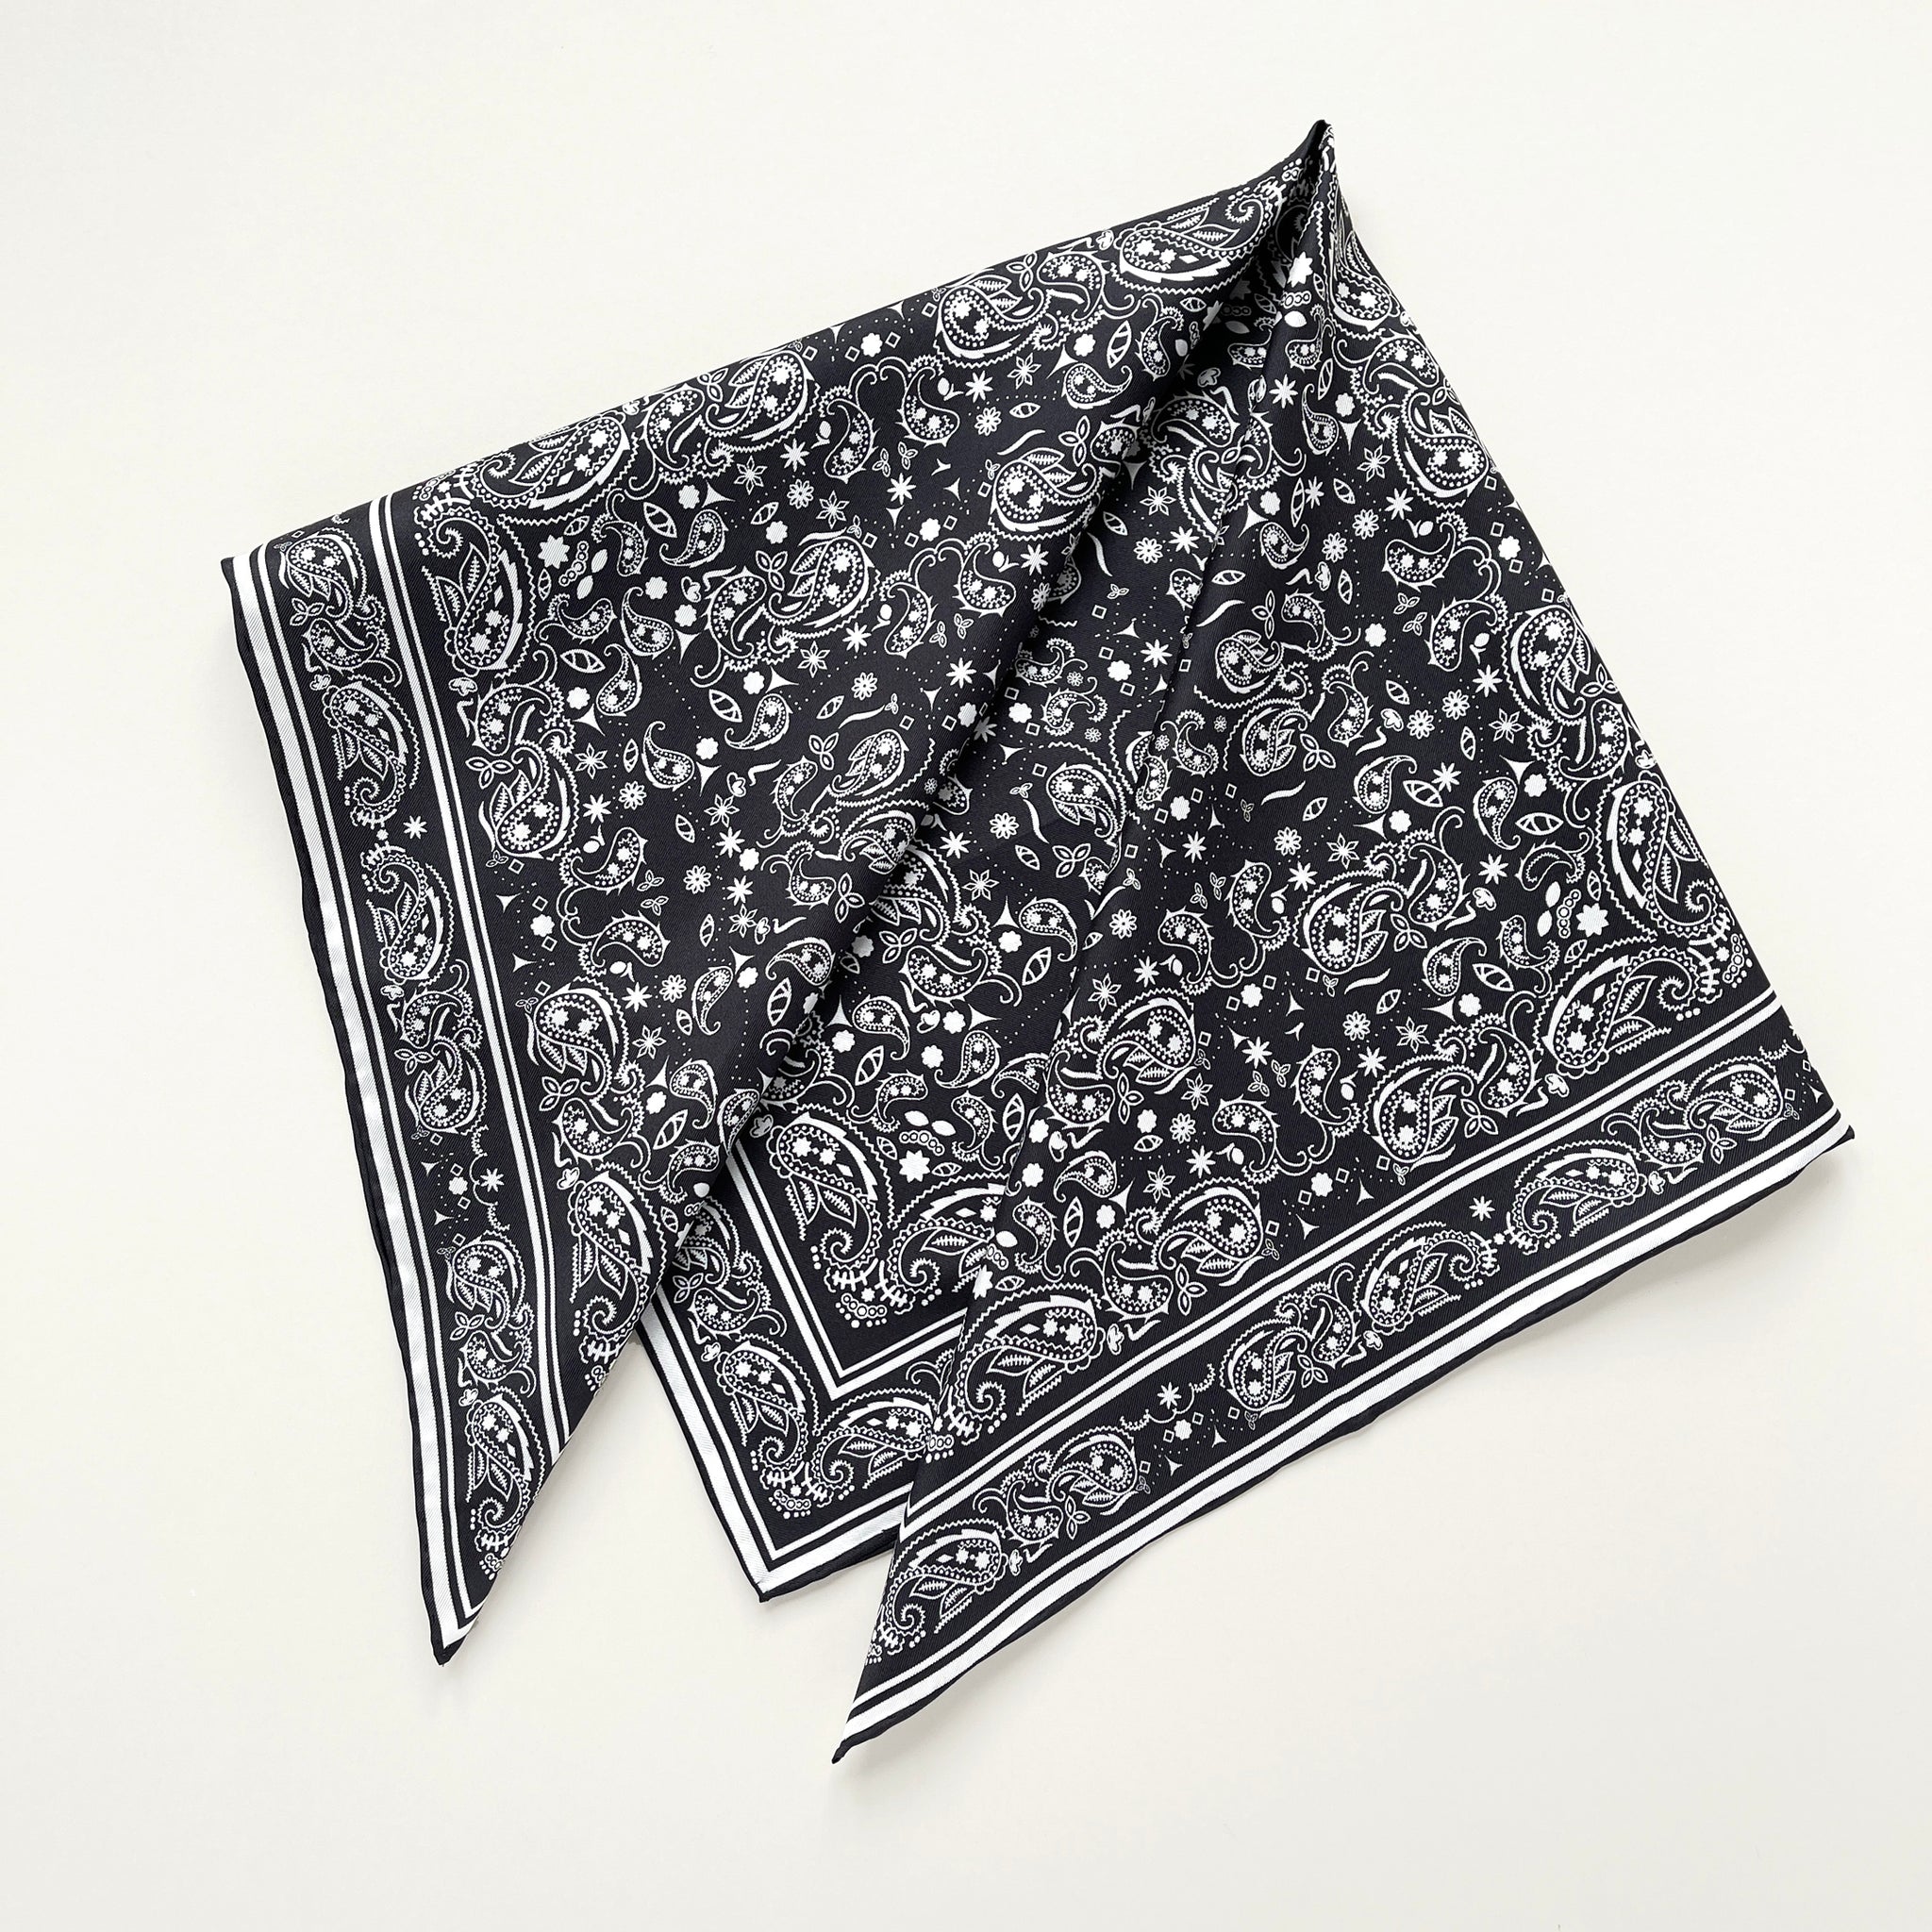 a black and white silk scarf featuring bohemian paisley print with hand-rolled edges